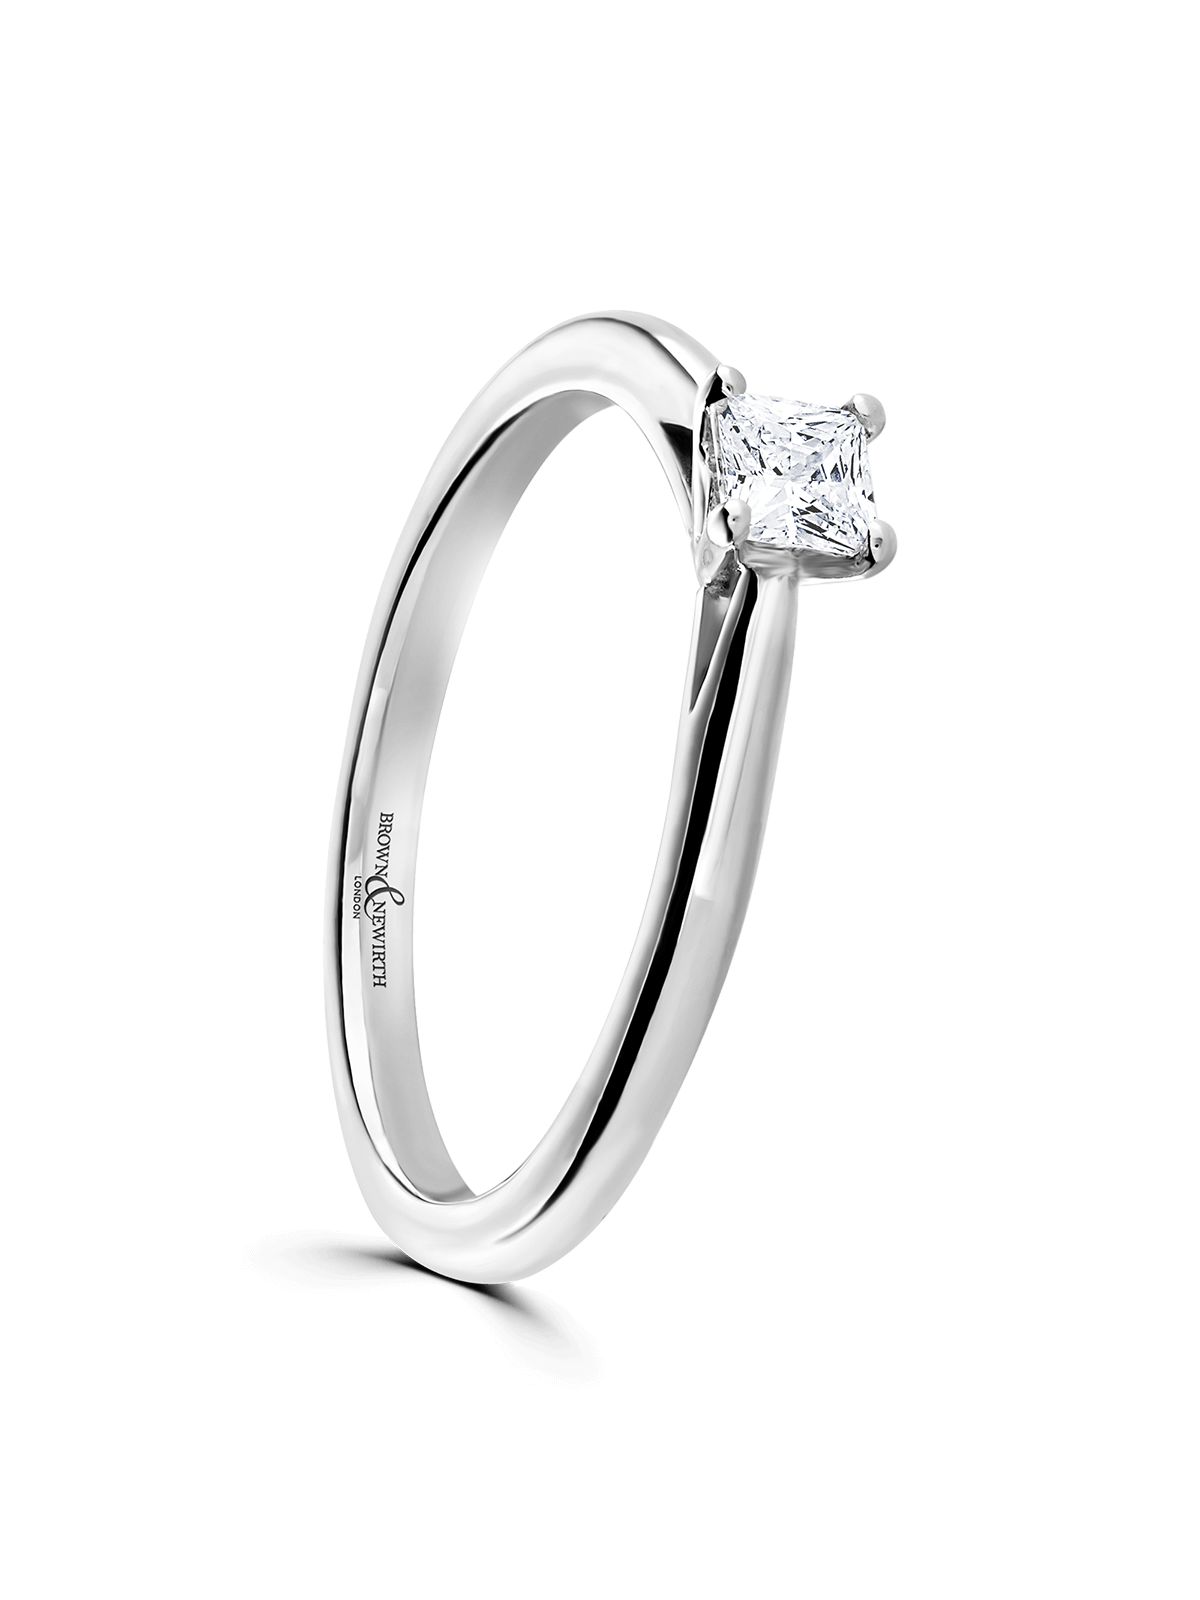 Brown & Newirth Heartbeat 0.25ct Princess Cut Diamond Solitaire Engagement Ring in Platinum